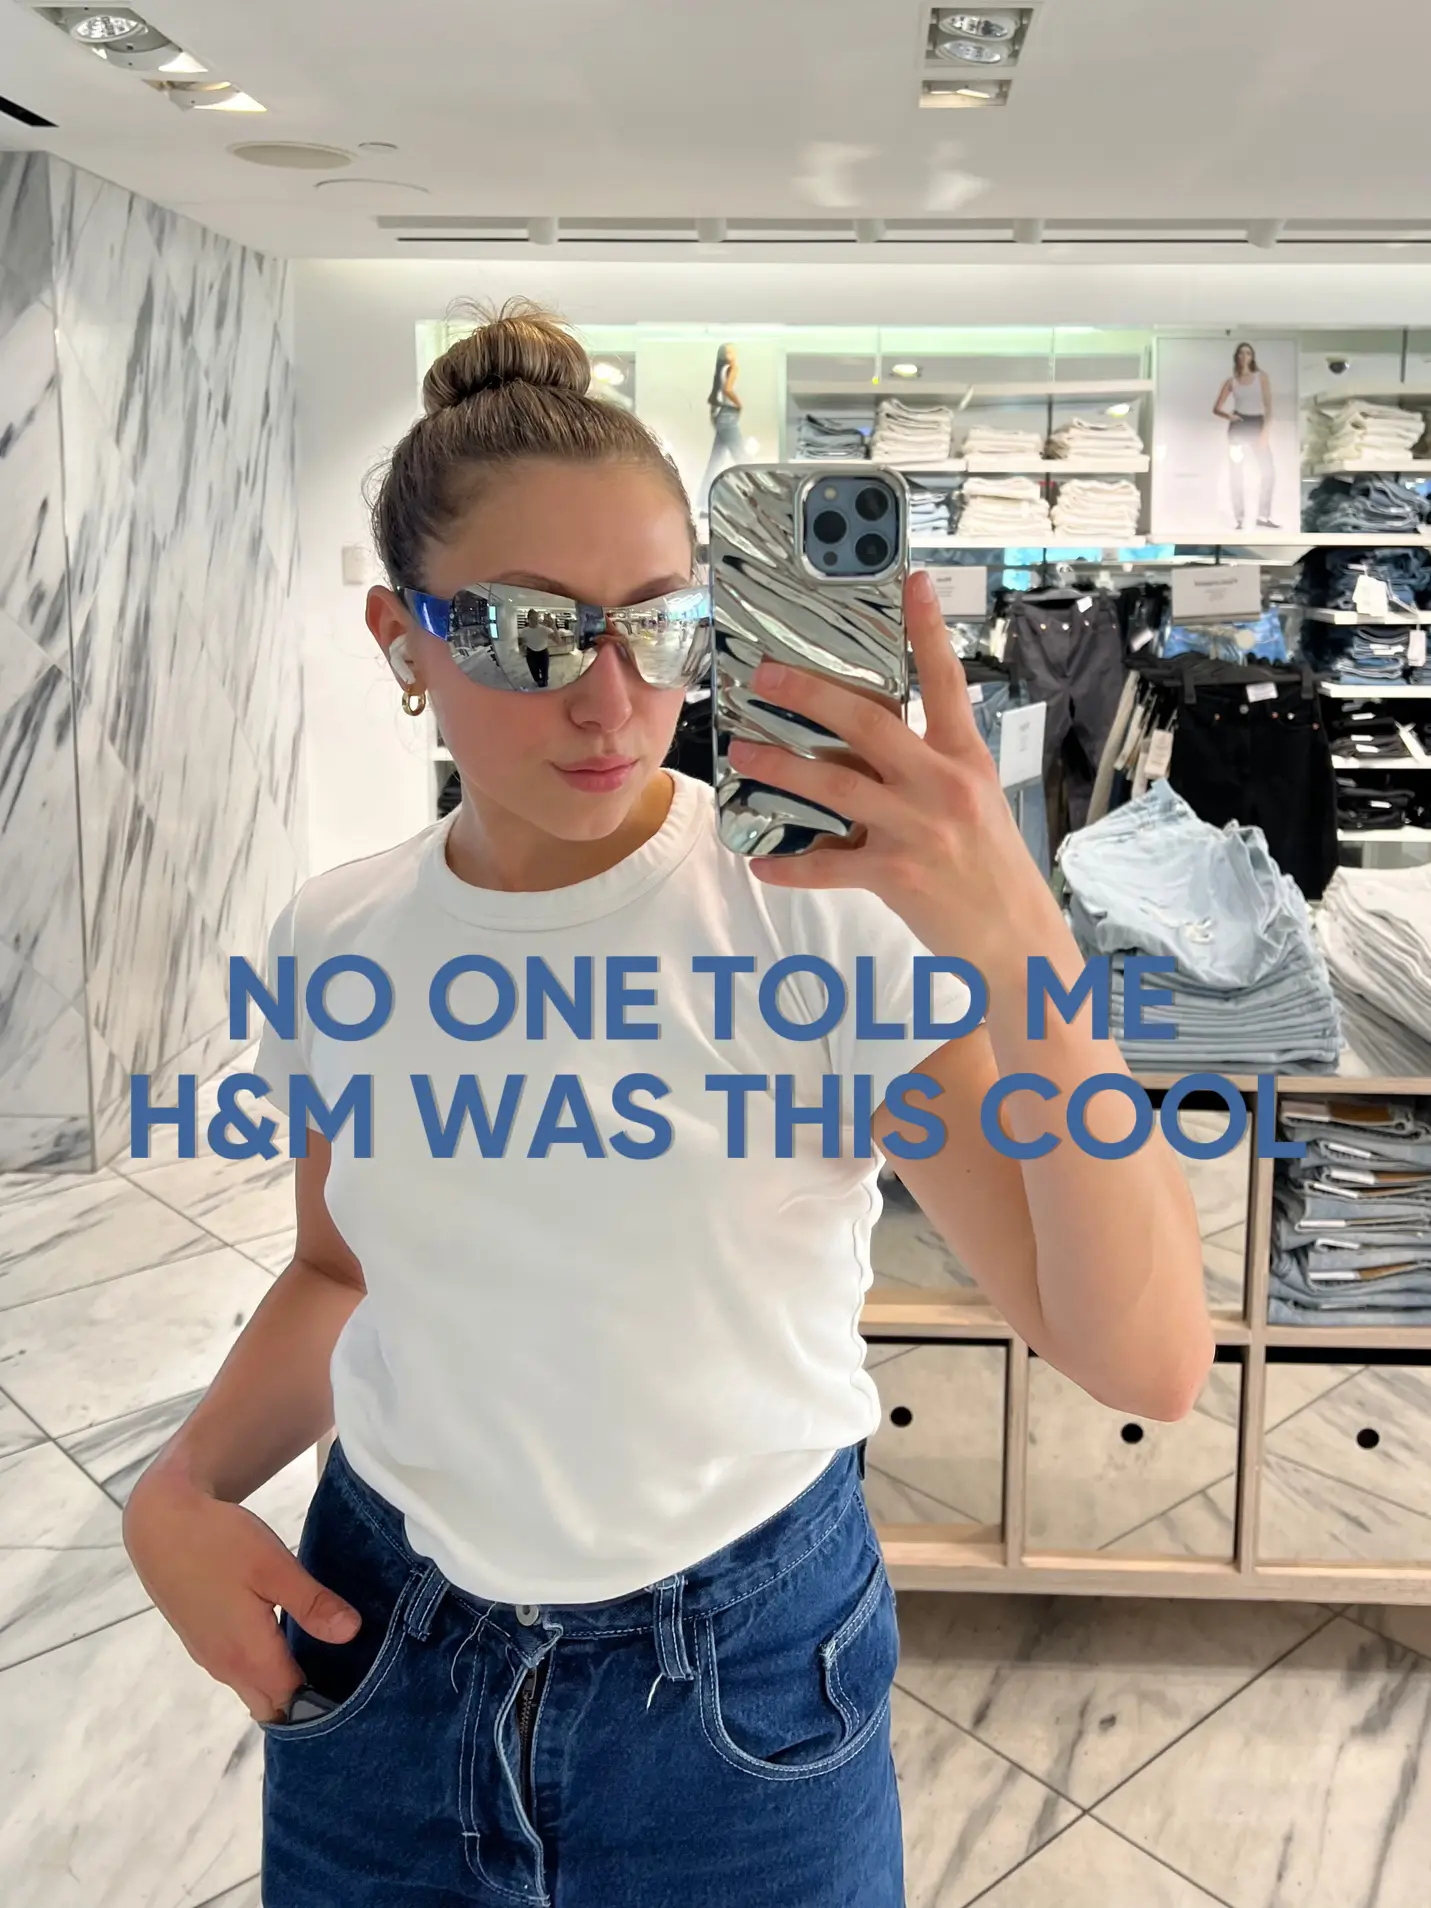 NO ONE TOLD ME H&M WAS THIS COOL's images